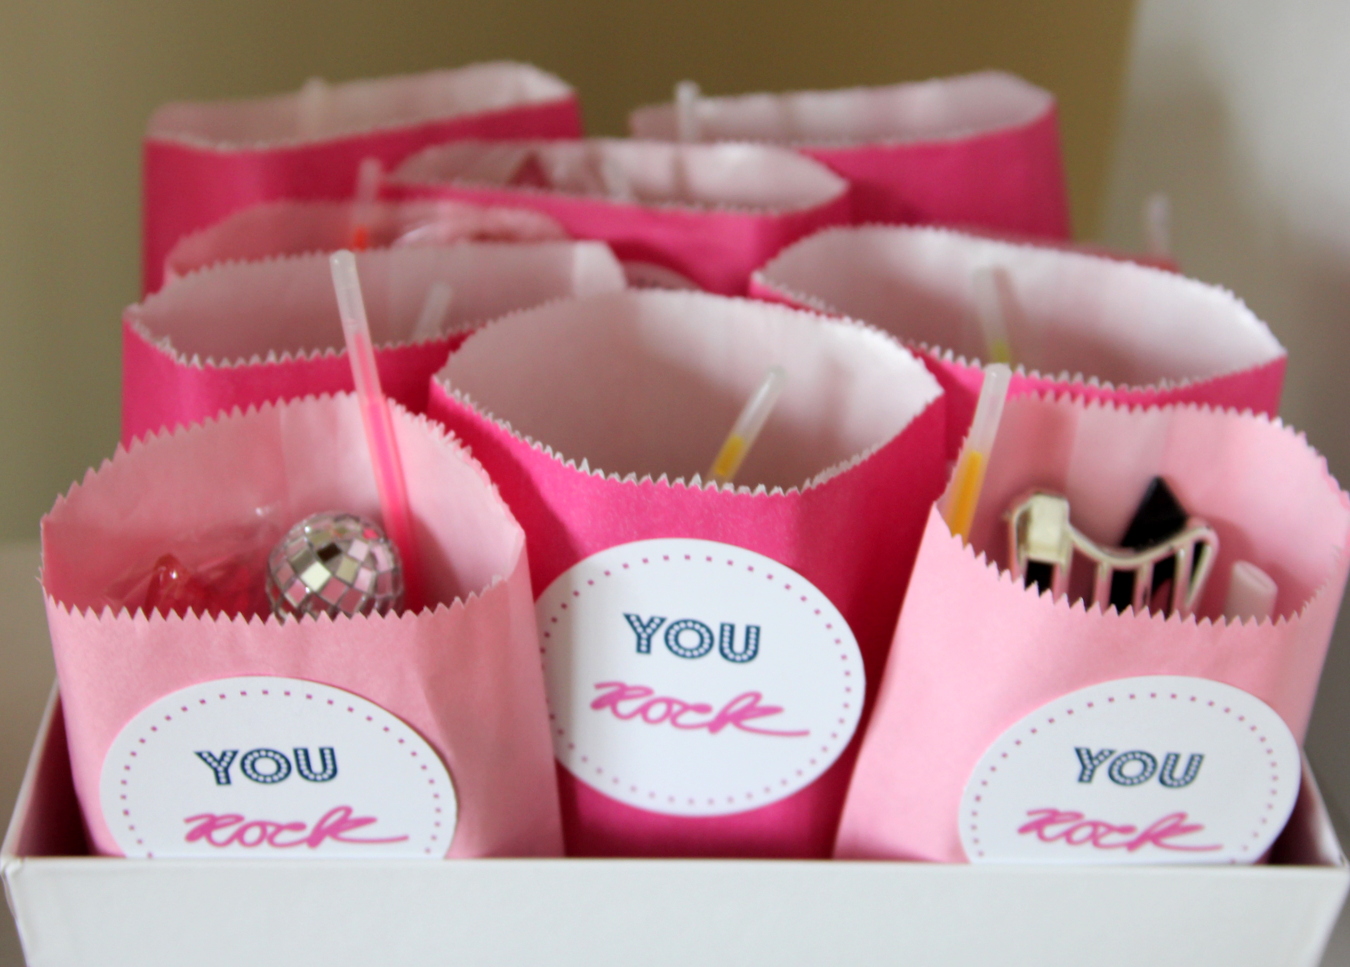 Time to party like a rock star! This sweet rock star birthday party includes all sorts of party ideas- like these cute rock star party favors!